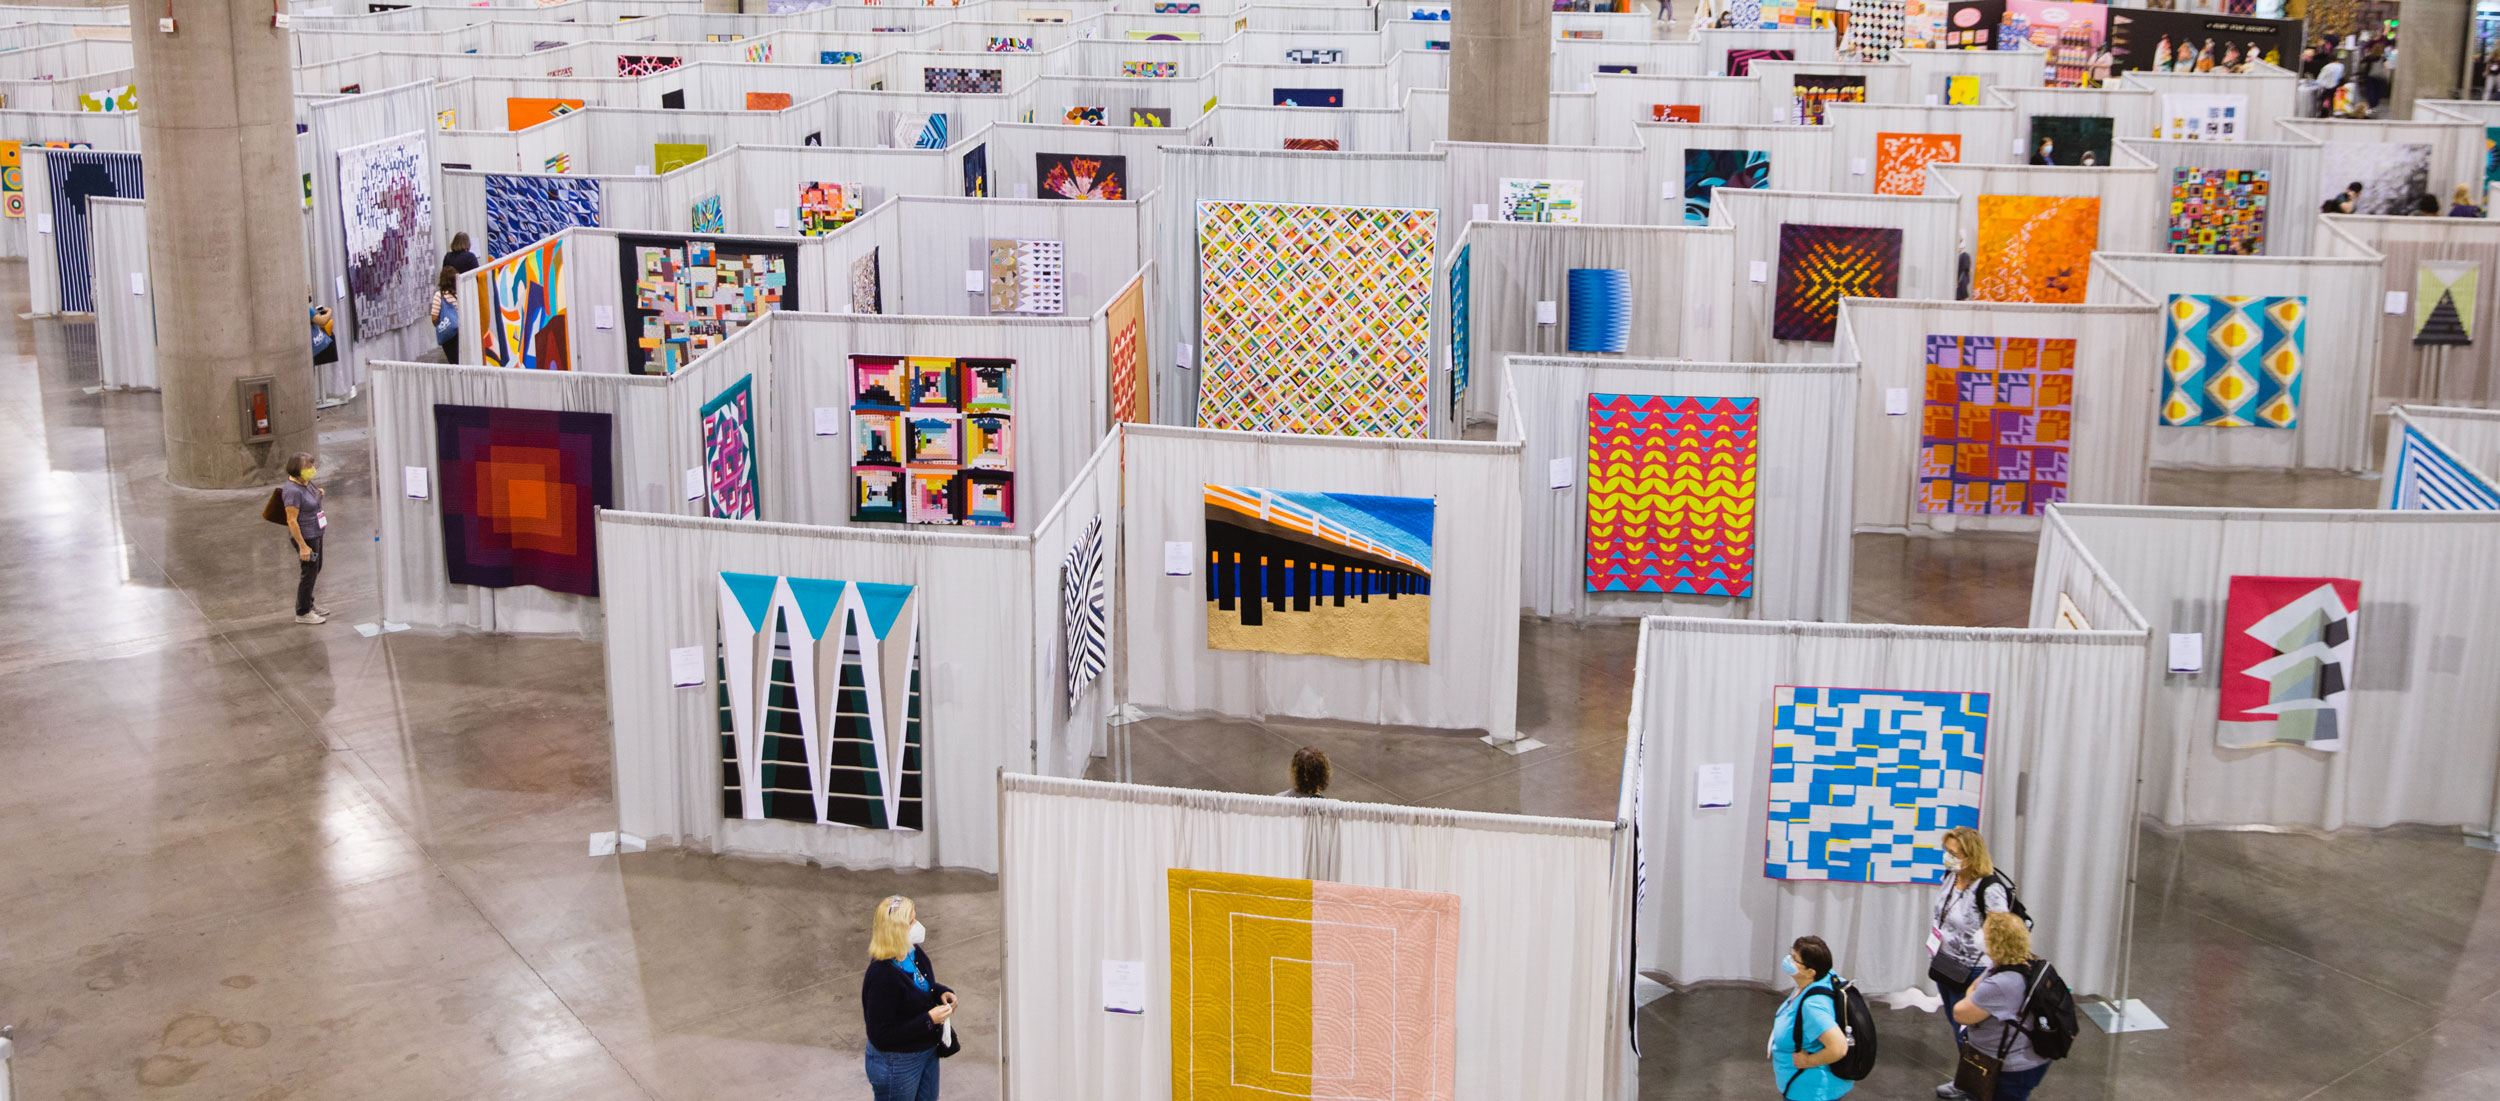 the quiltcon show floor with rows of drape and colorful quilts